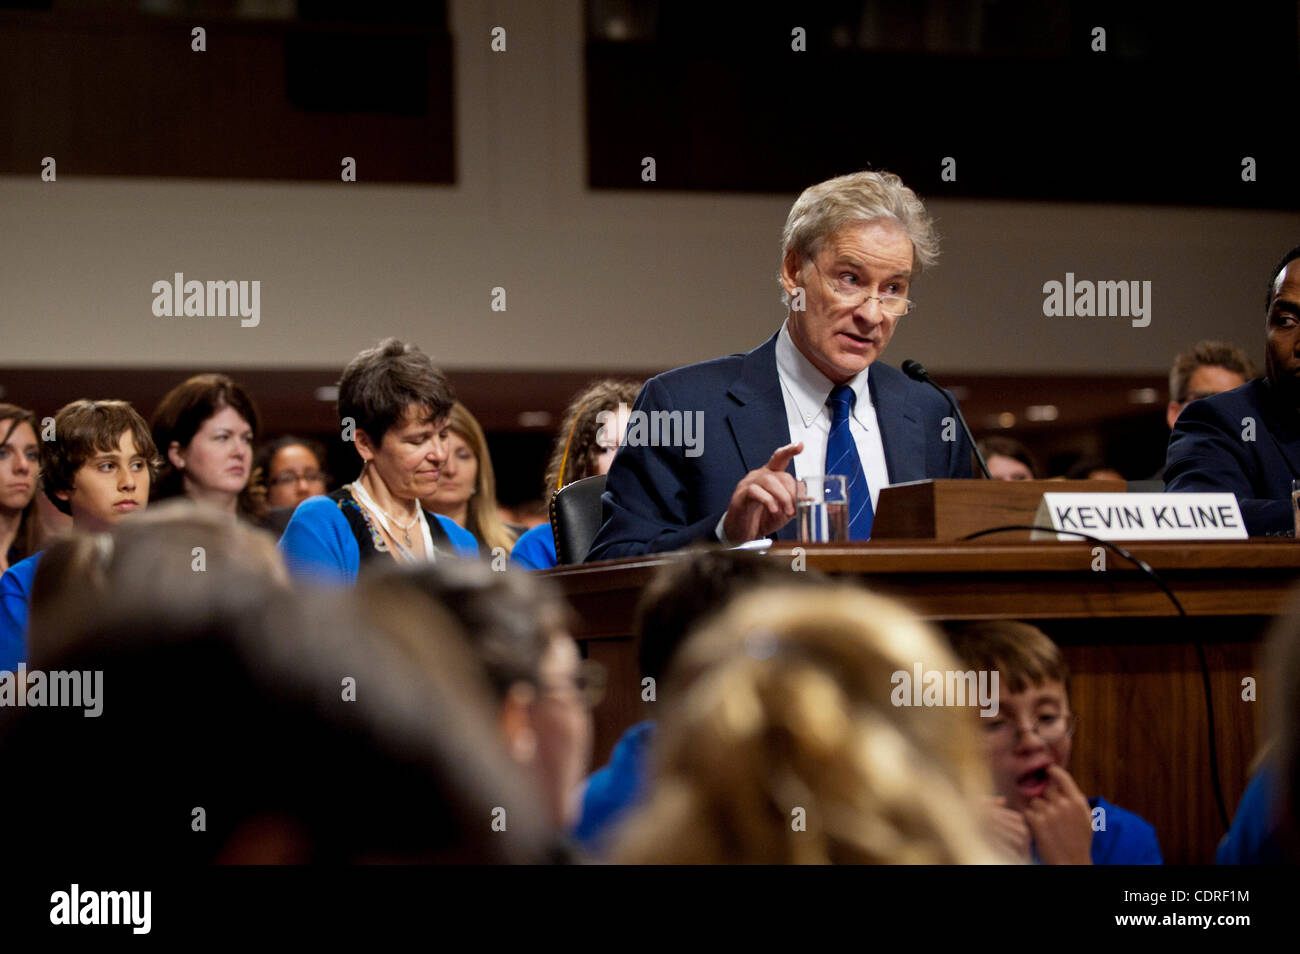 June 22, 2011 - Washington, District of Columbia, U.S. - Actor KEVIN KLINE, celebrity advocate and co-chairman of the Juvenile Diabetes Research Foundation testifies before a Senate Homeland Security and Governmental Affairs Committee hearing on Juvenile Diabetes Research on Capitol Hill on Wednesda Stock Photo